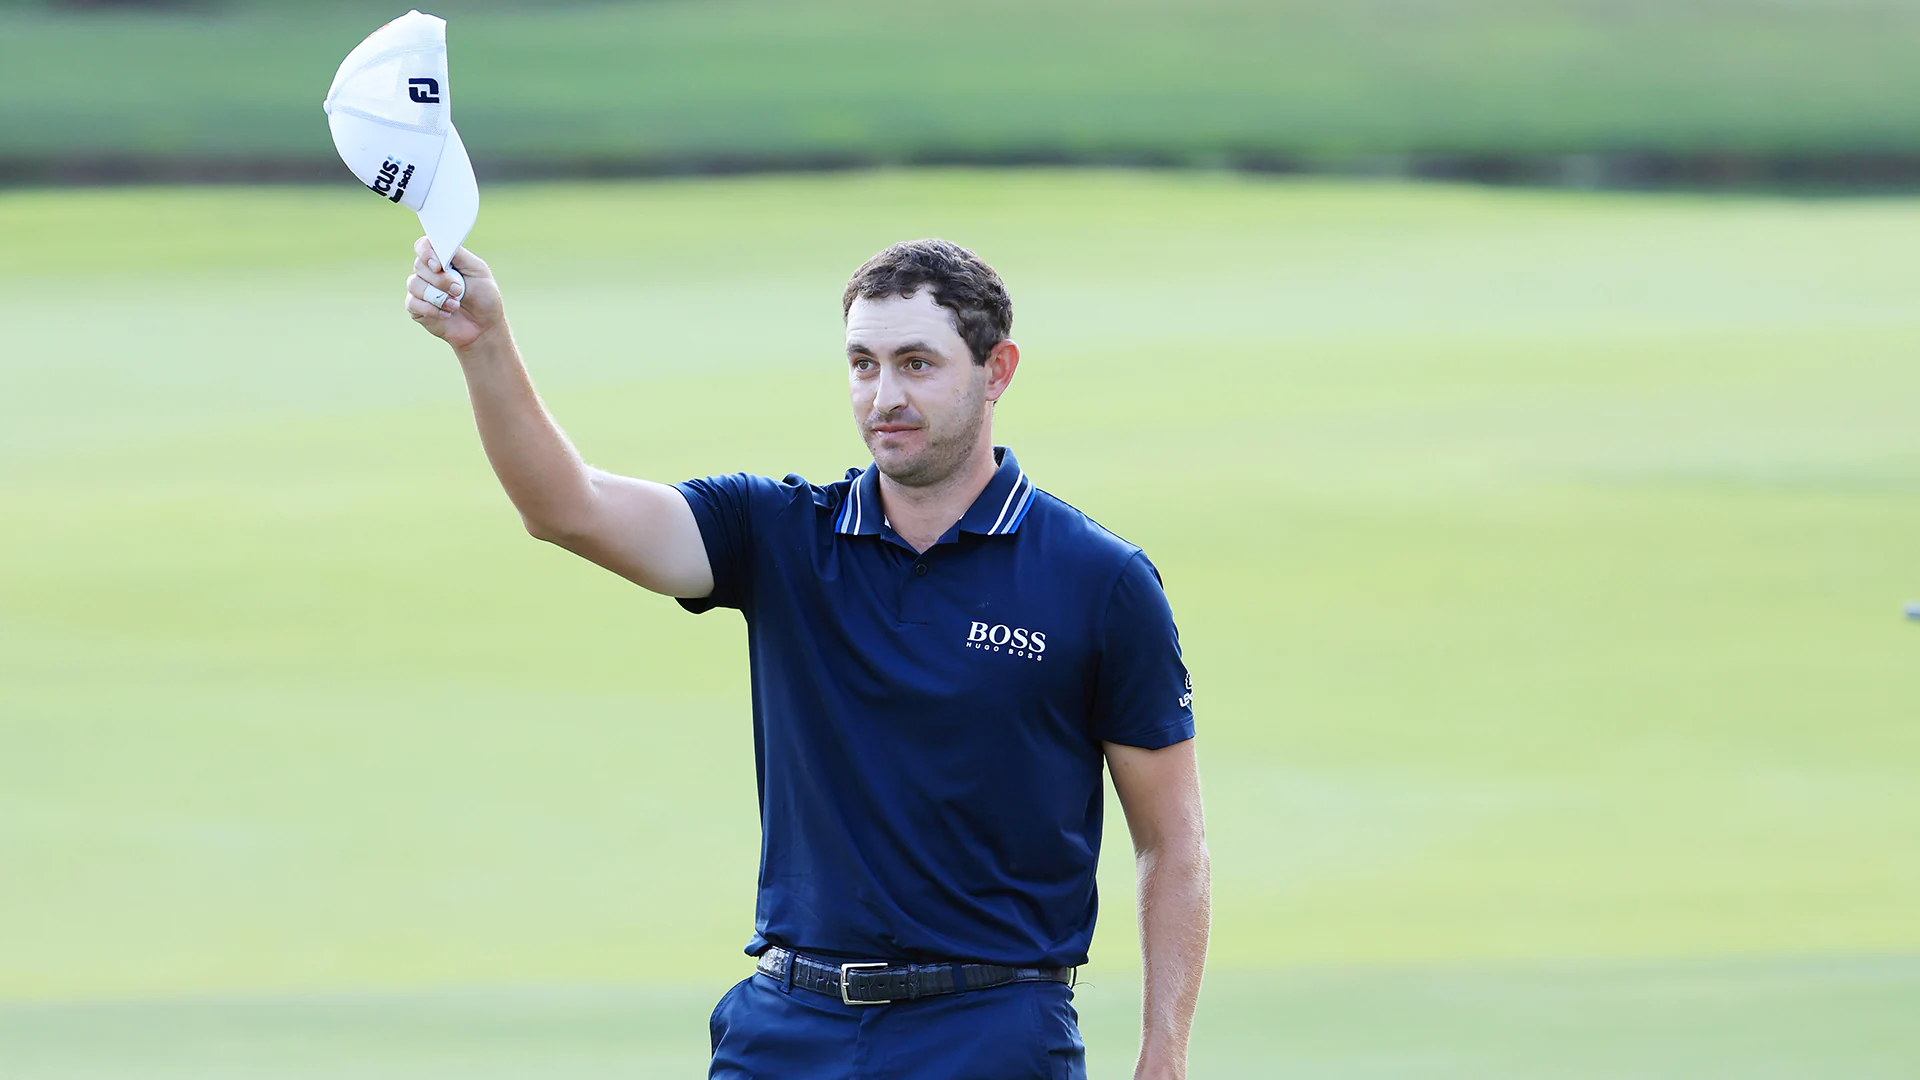 Patrick Cantlay wins again, this time at East Lake for $15 million FedExCup prize